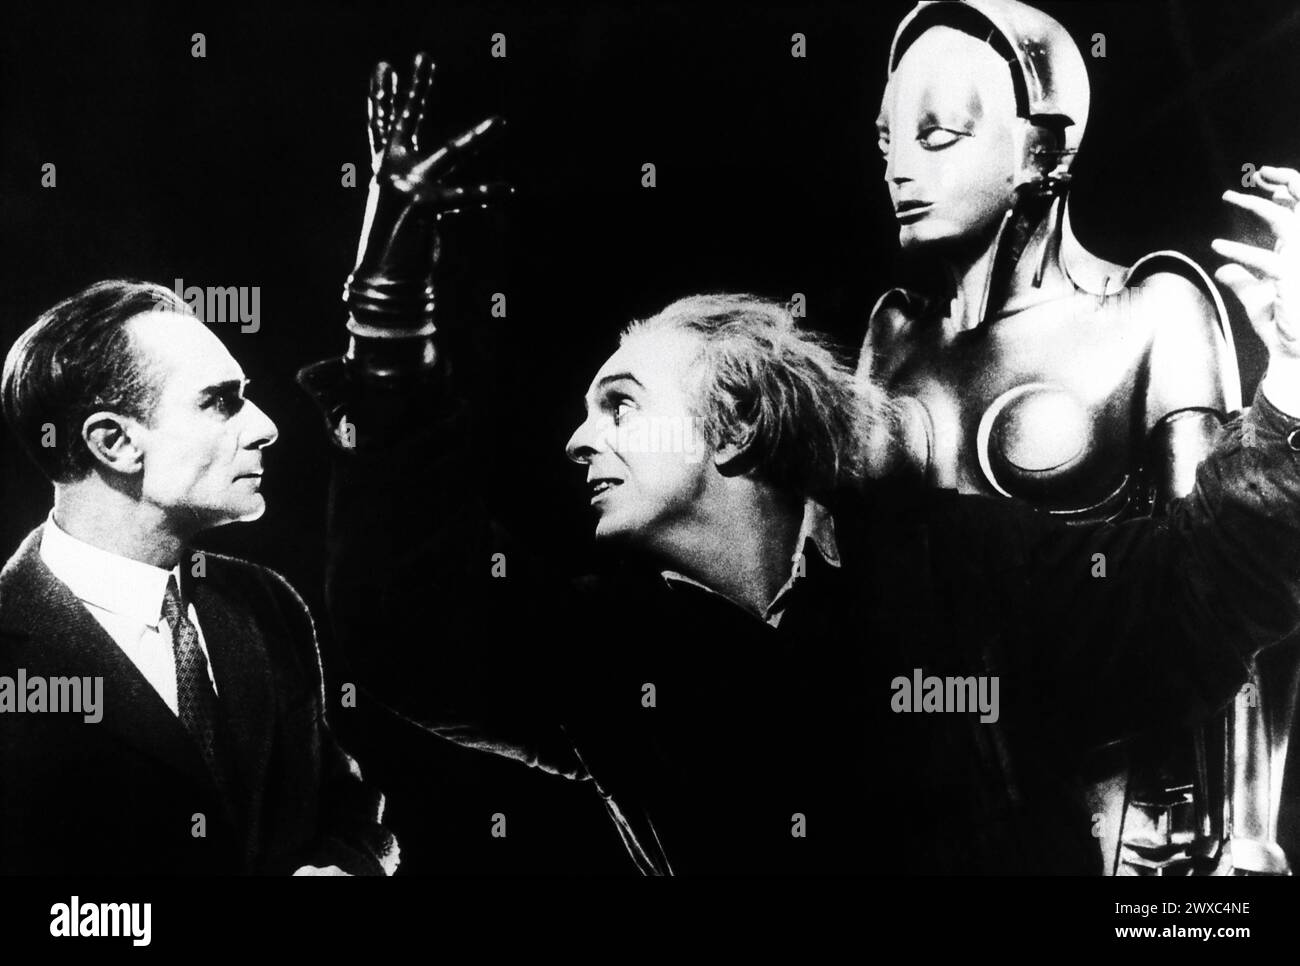 ALFRED ABEL as Fredersen RUDOLF KLEIN-ROGGE as the Inventor and BRIGITTE HELM as the Robot in METROPOLIS 1927 director FRITZ LANG novel and screenplay Thea von Harbou Universum Film (UFA) Stock Photo